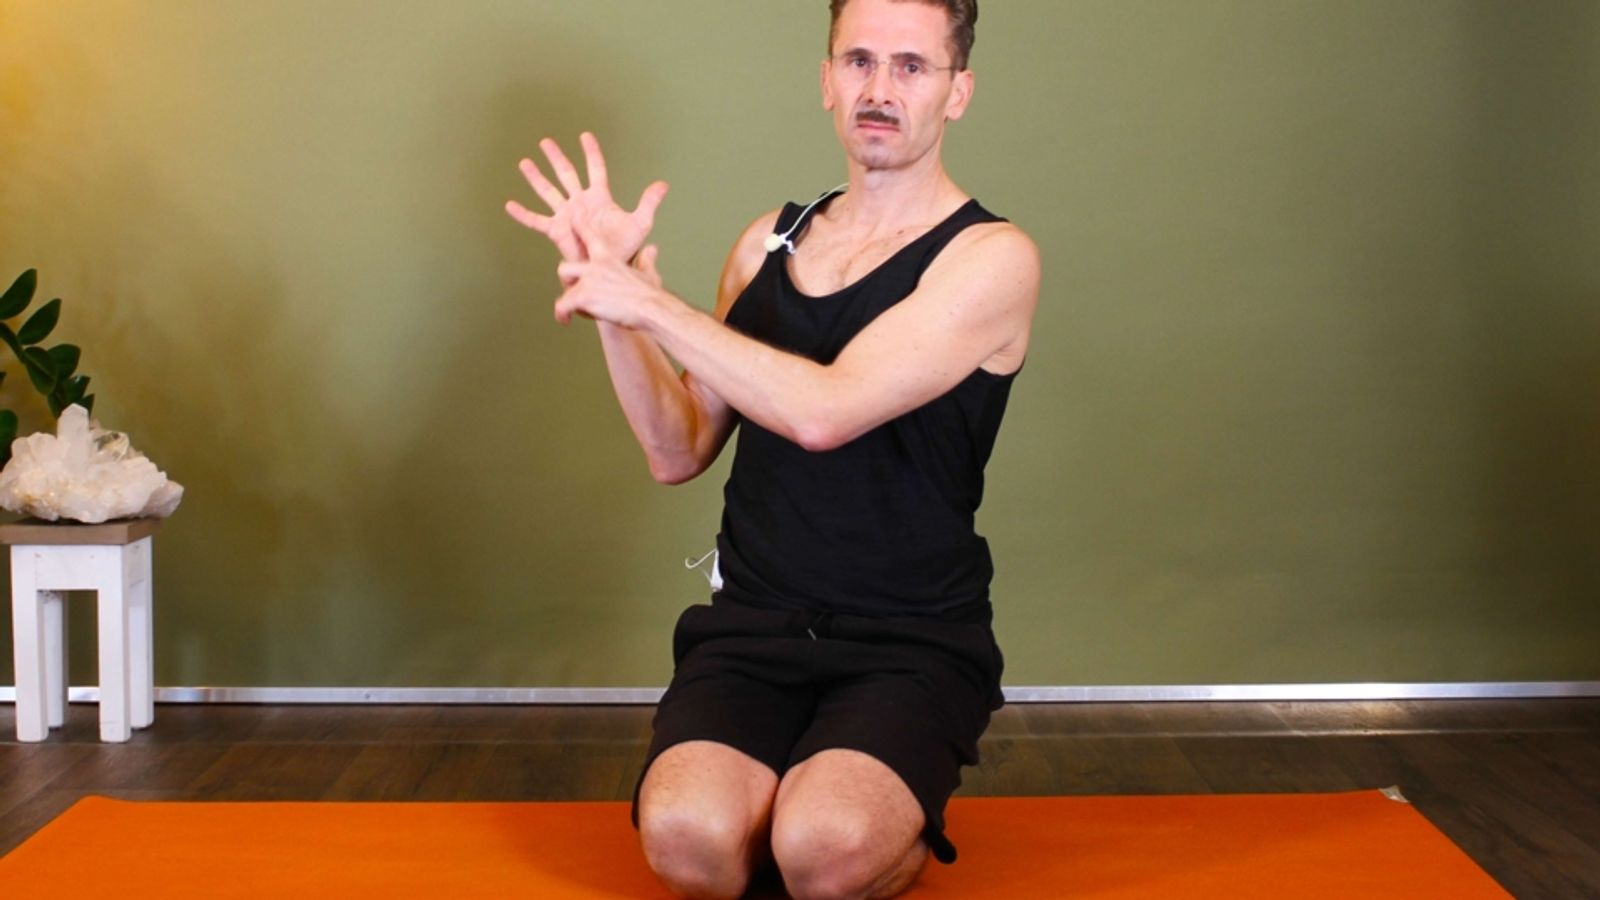 Focus balance for supporting postures